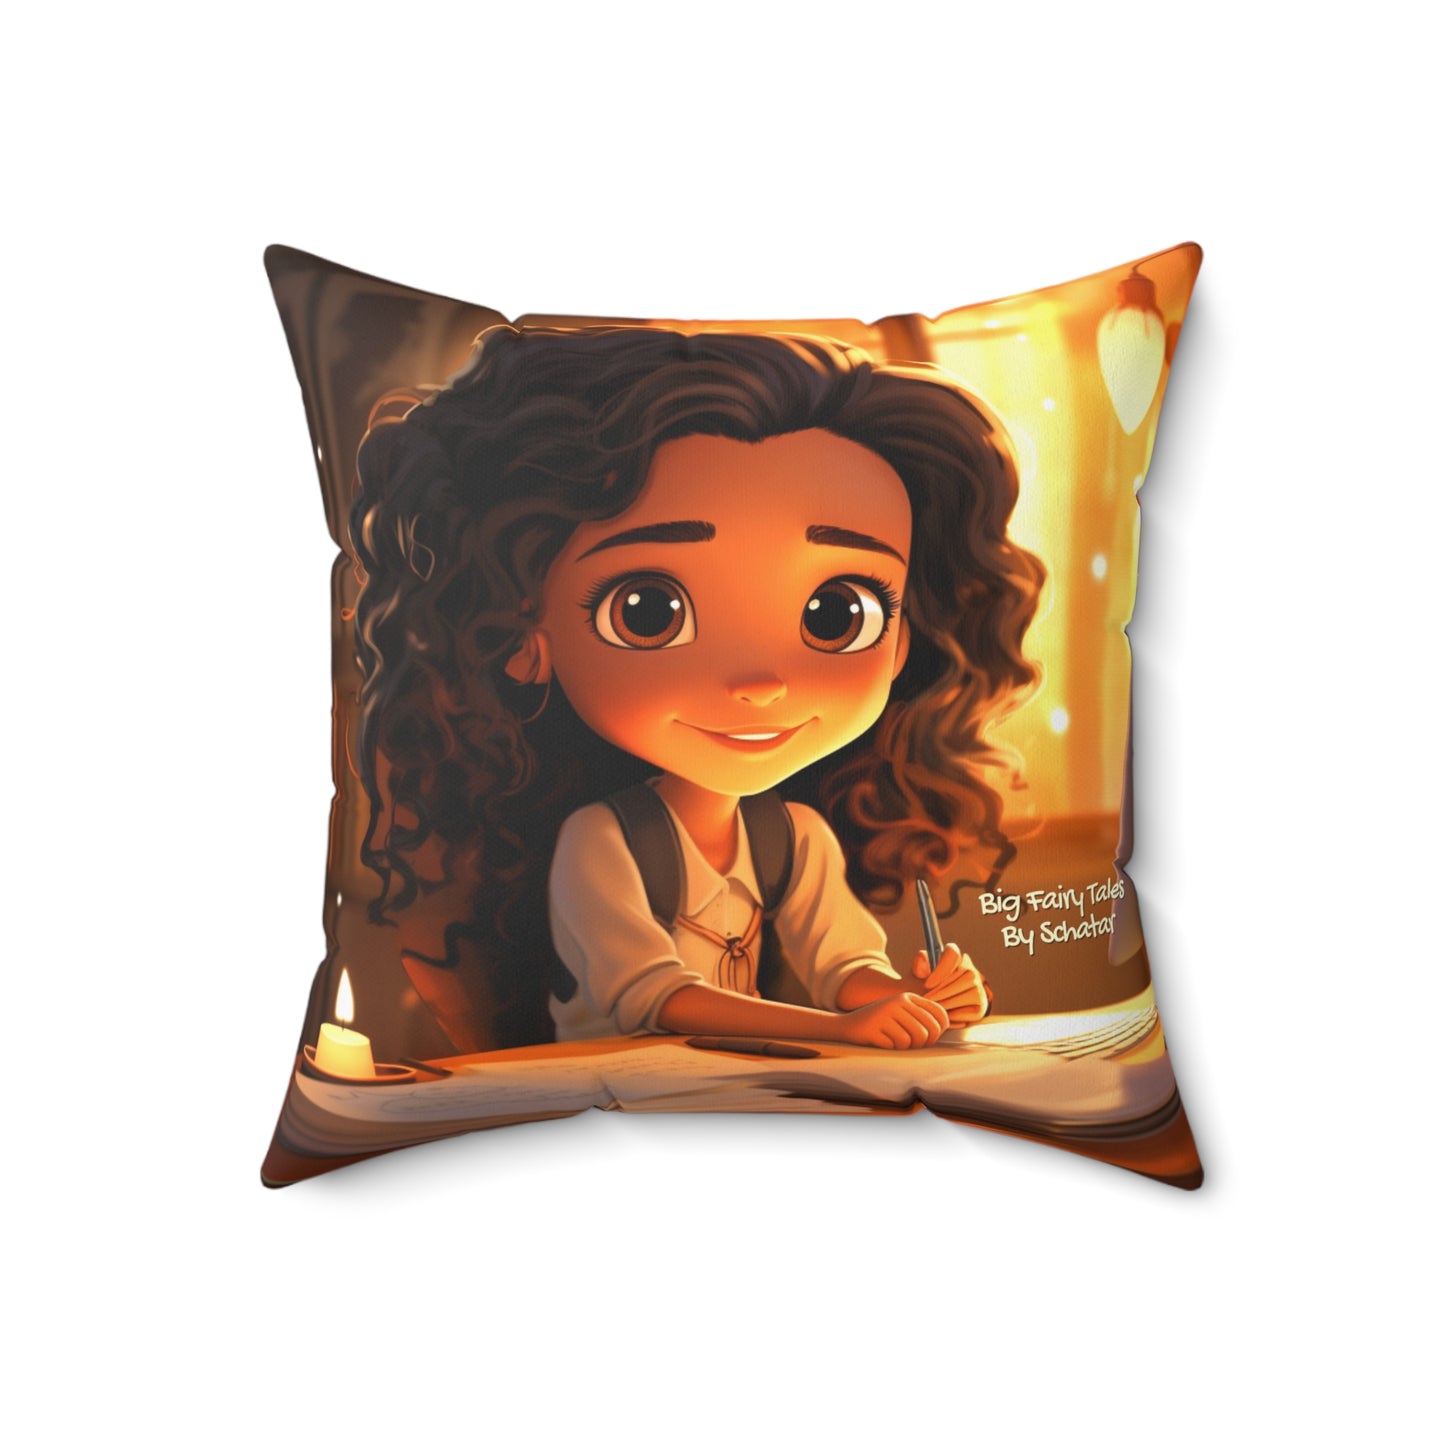 Writer - Big Little Professionals Plush Pillow 8 From Big Fairy Tales By Schatar